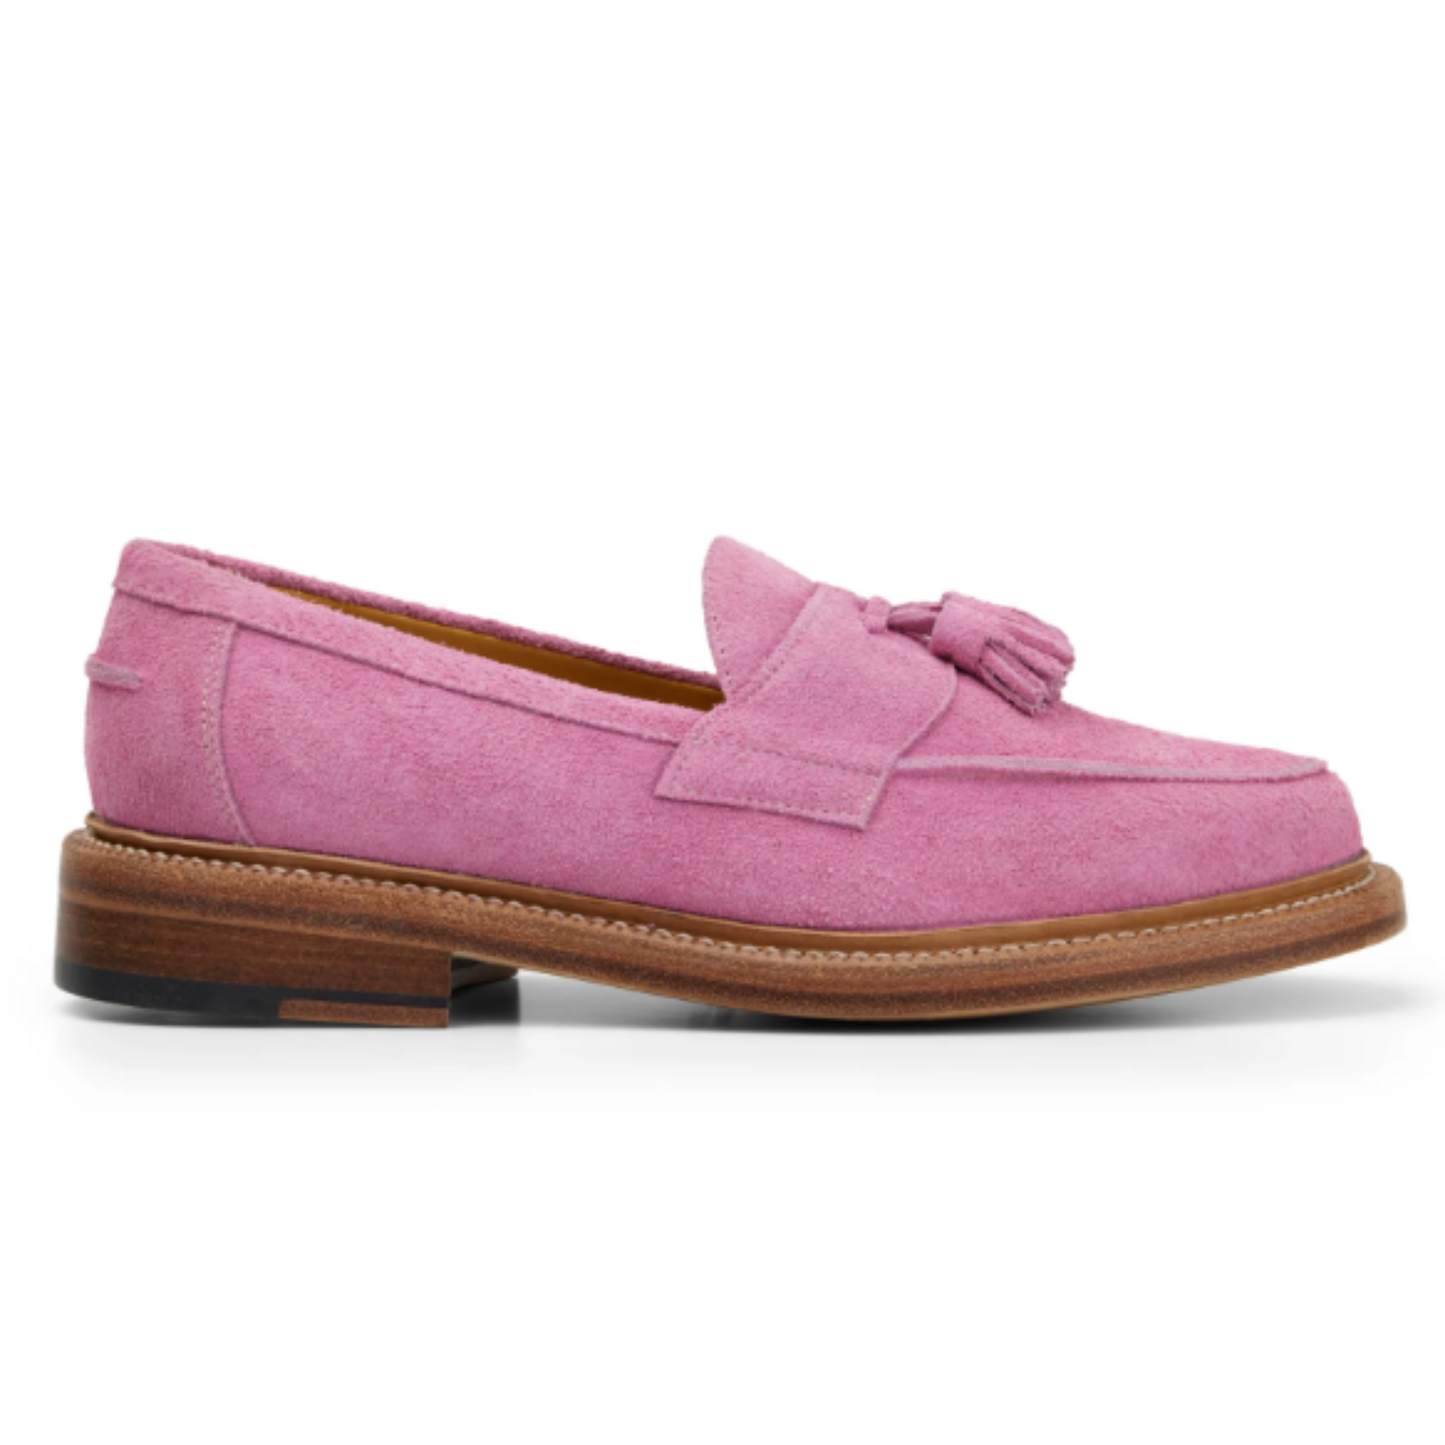 Tailor Made Handmade Pink Suede Tassels Slip On Moccasins Loafers Shoes